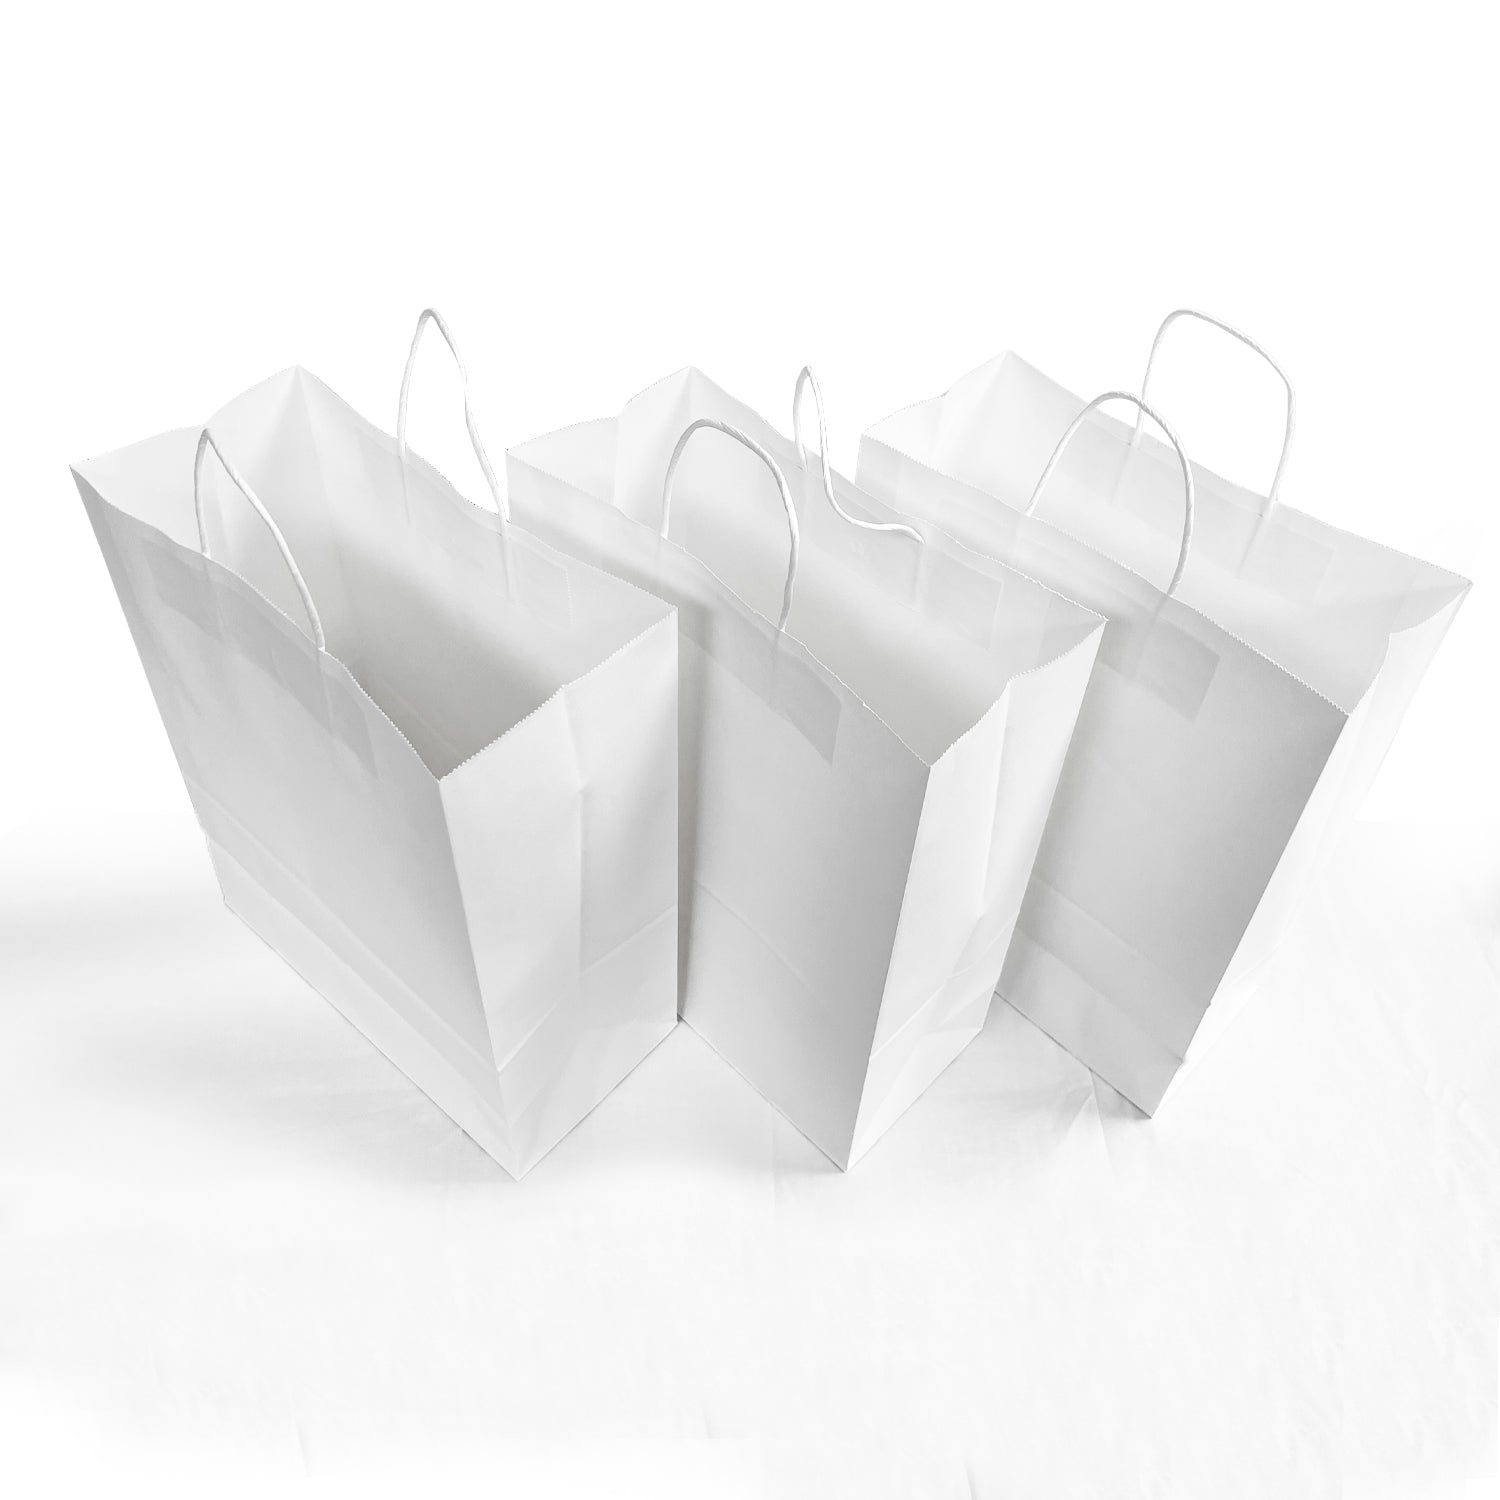 250 Pcs, Traveler,  13x6x16 inches, White Euro Tote Paper Bags, with Rope Handle